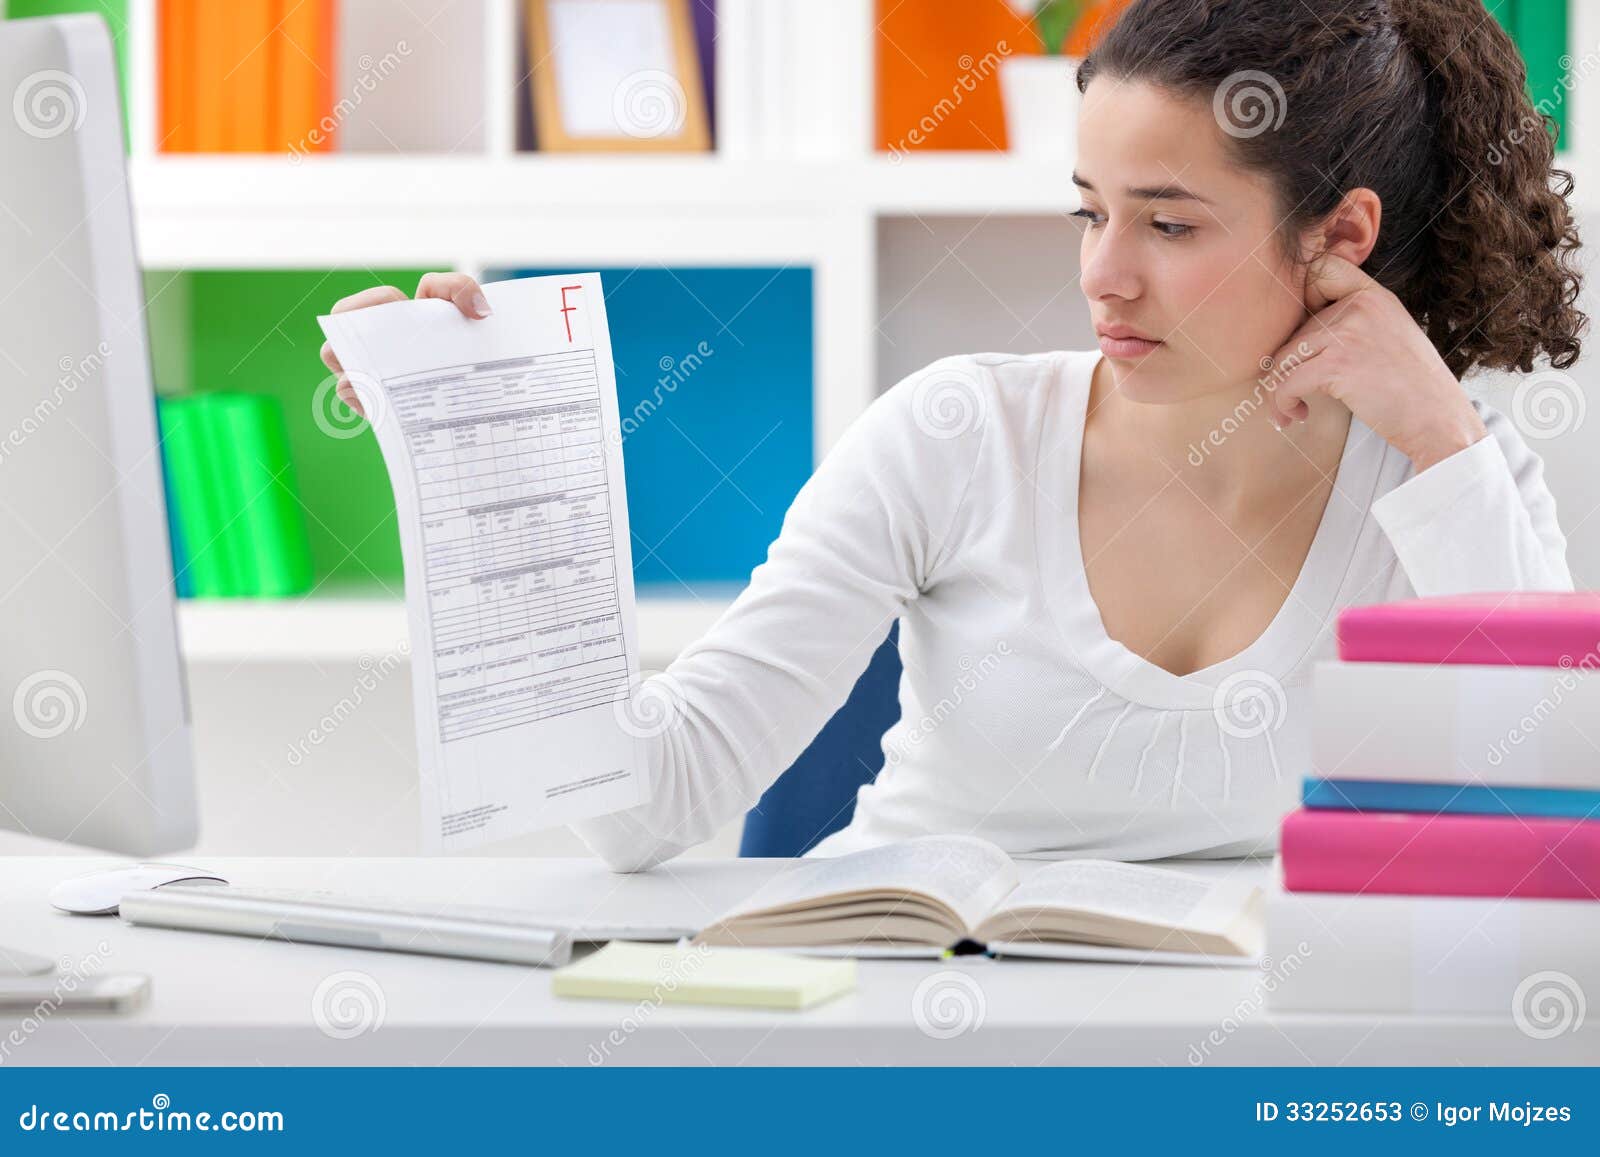 Disappoint Student With Test Result Stock Image Image of